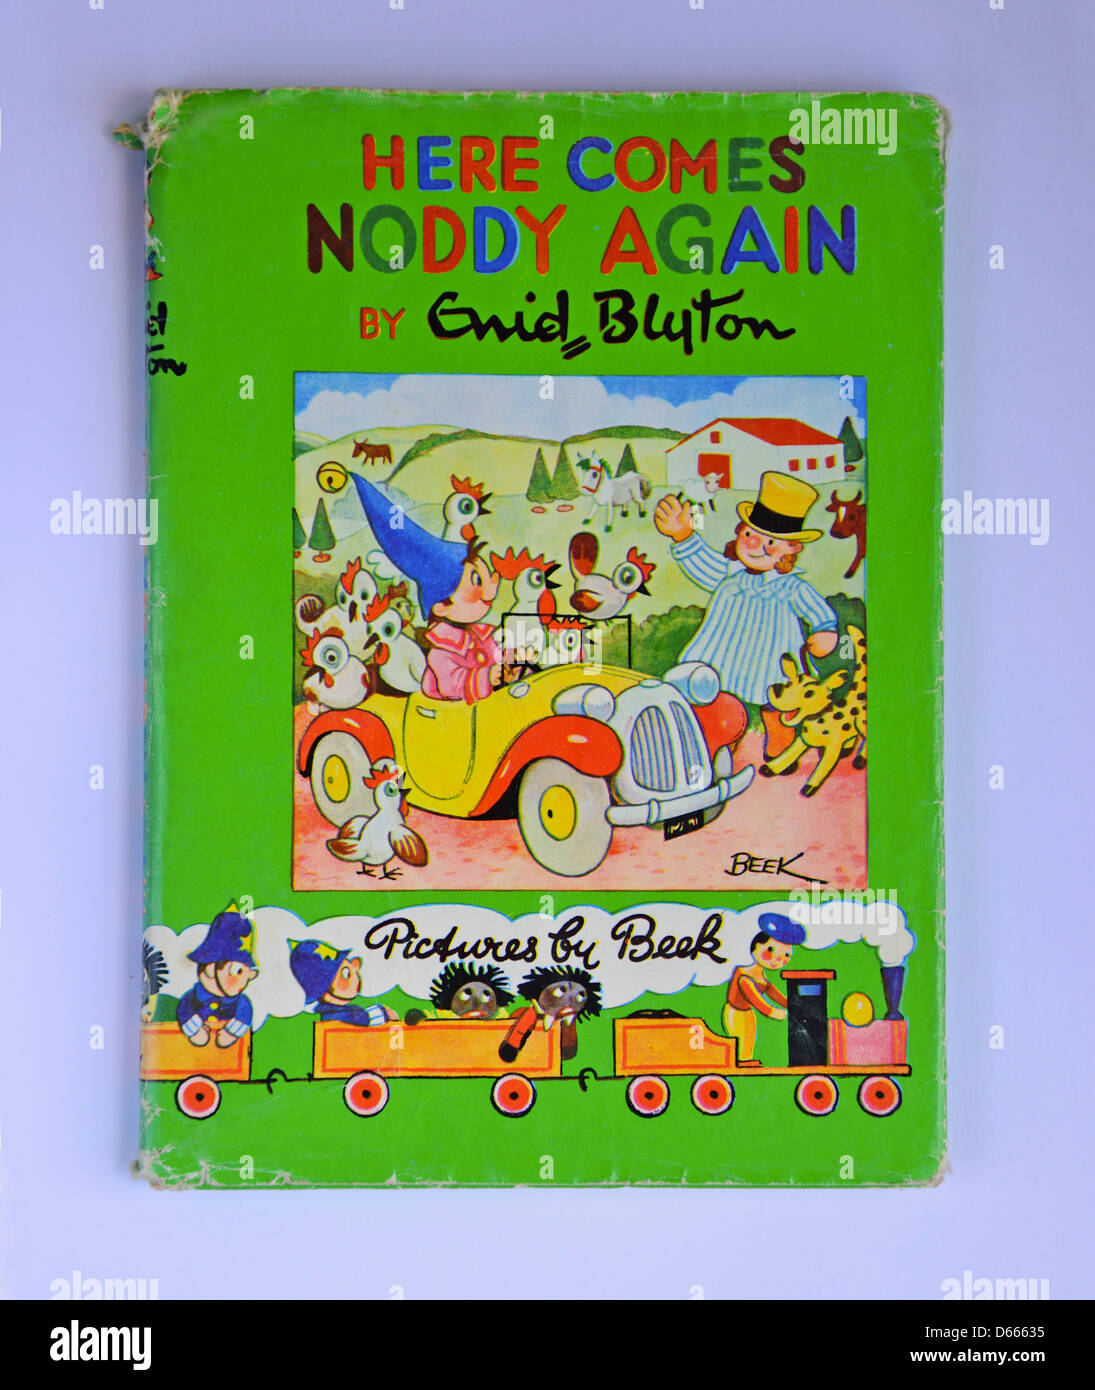 Enid Blyton's 'Here comes Noddy again' Noddy book, Ascot, Windsor, Berkshire, Angleterre, Royaume-Uni Banque D'Images